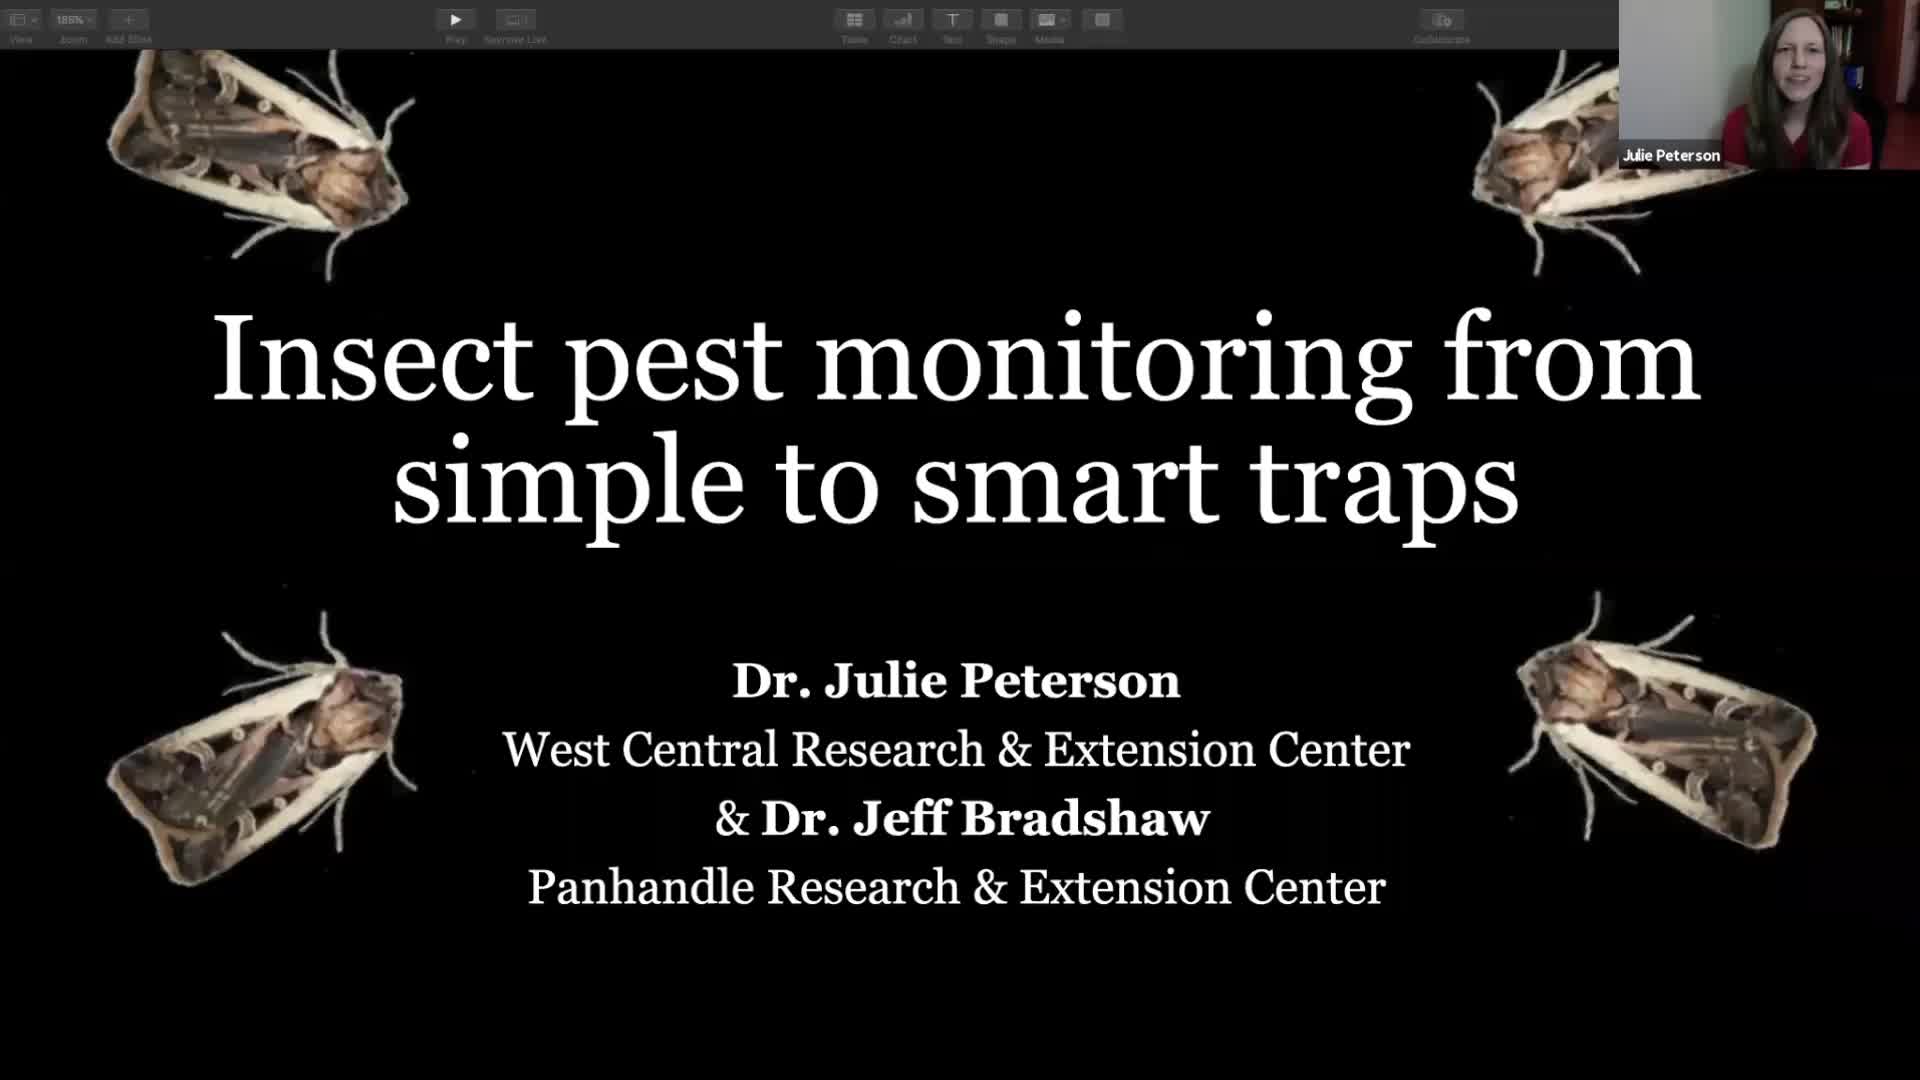 DIY Pest Control Insect/Monitor Traps